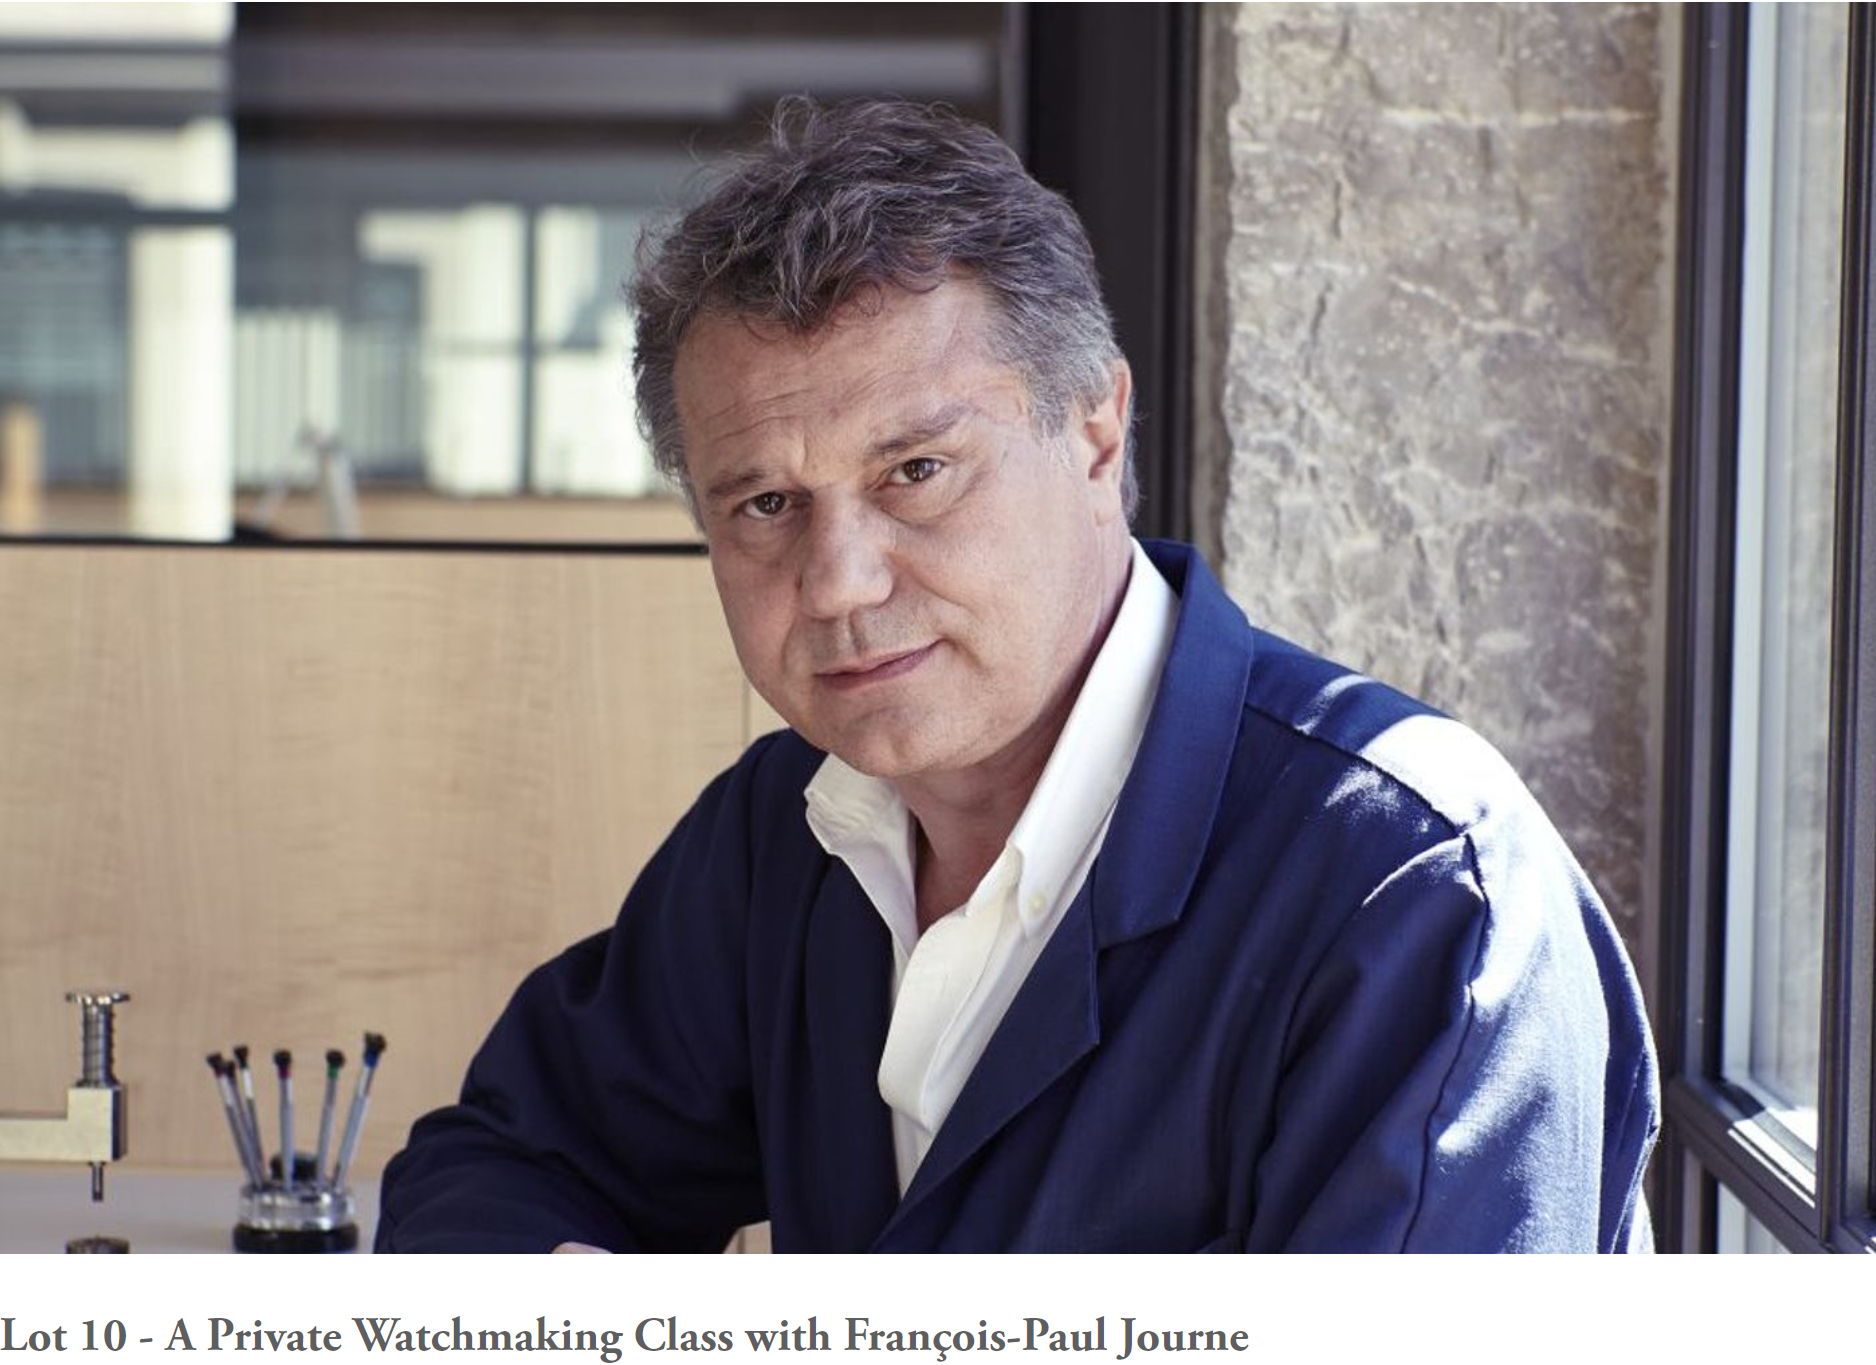 Win A Once in a Lifetime Watchmaking Session with François-Paul Journe